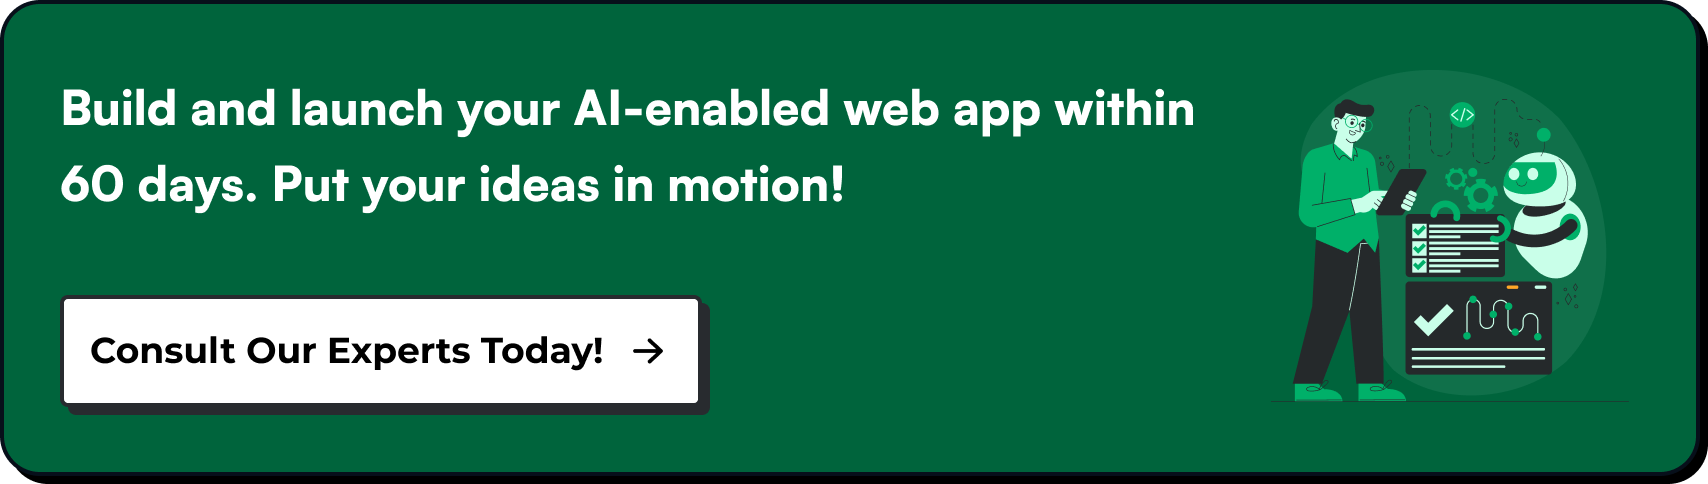 Build and launch your AI-enabled web app within 60 days. Put your ideas in motion!